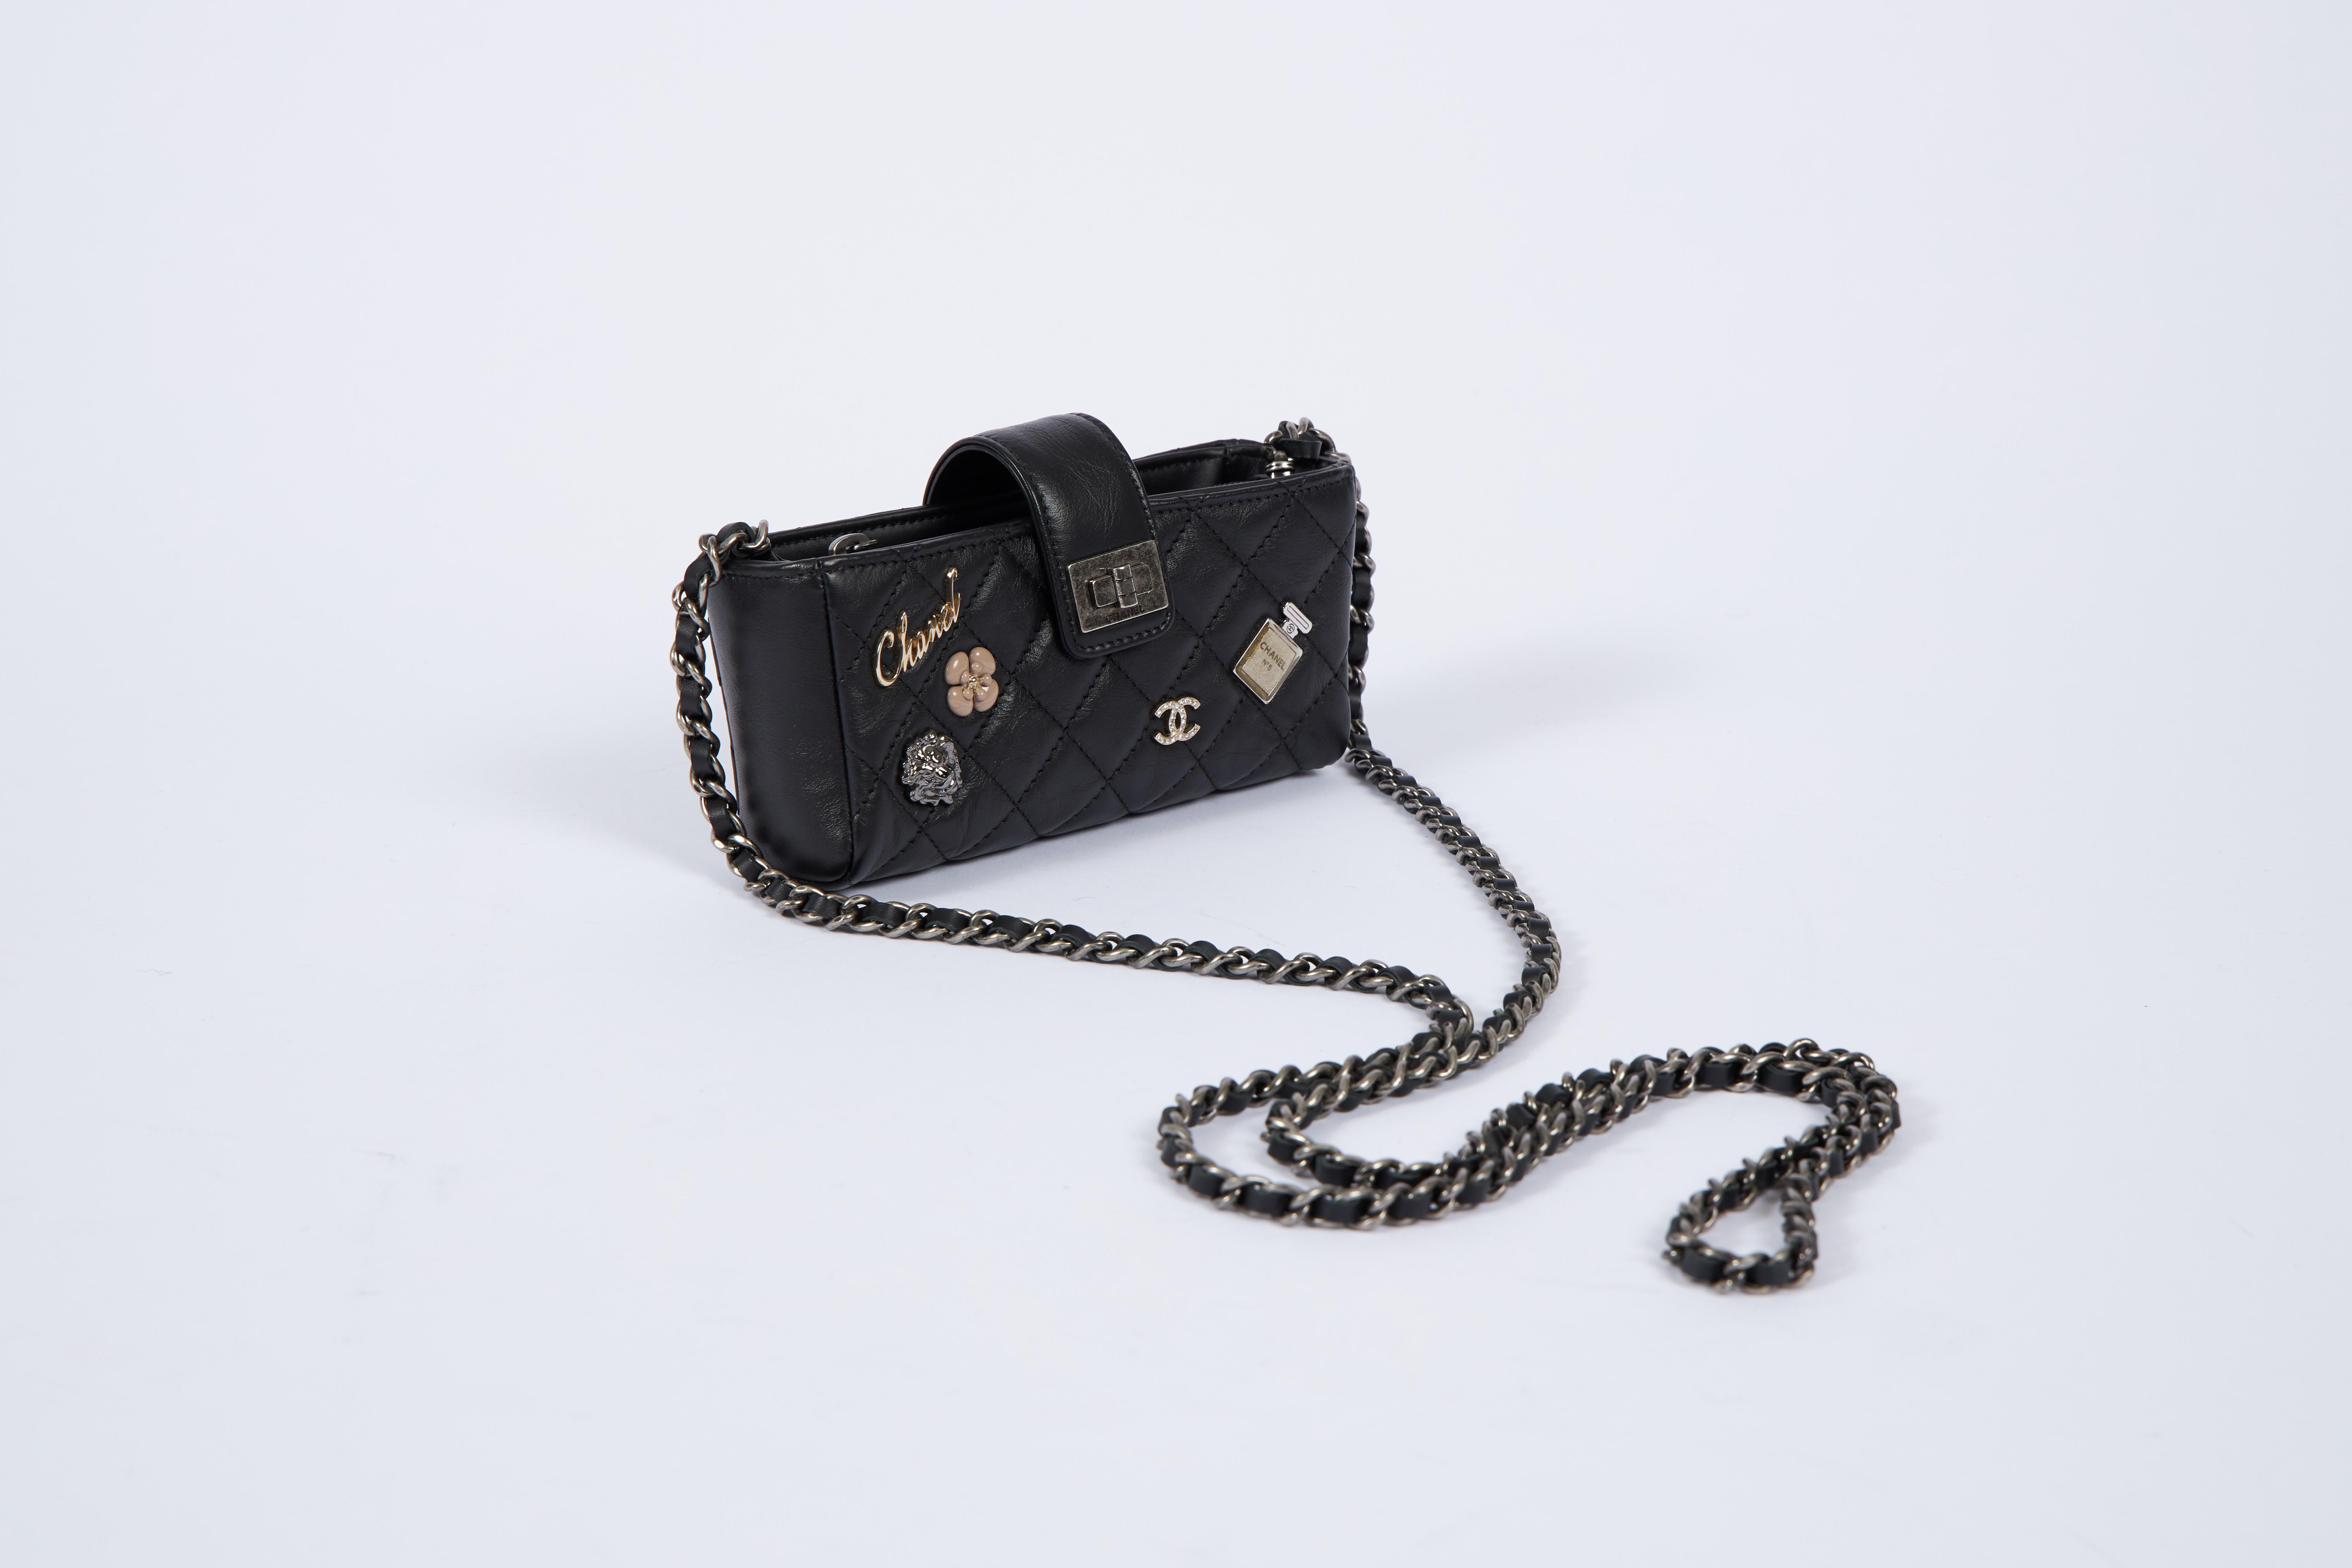 Chanel limited edition reissue black cross body with metal charms. Comes with hologram, ID card, dust cover and box.